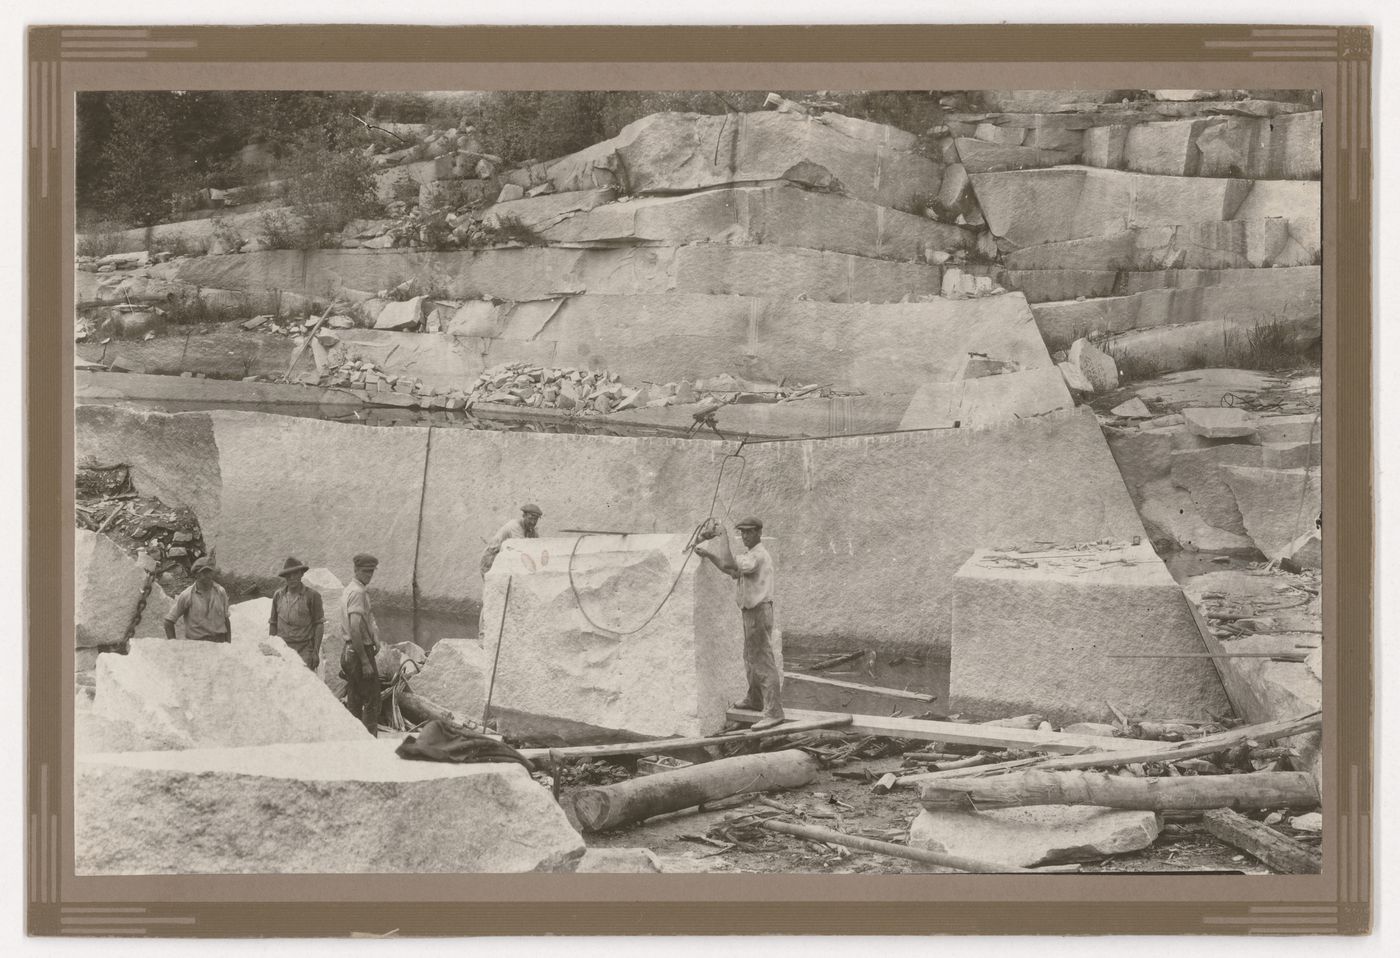 View of the Stanstead Granite Quarries with employees extracting stone for columns of the Palais de justice (now Édifice Ernest-Cormier), Beebe, Quebec, Canada